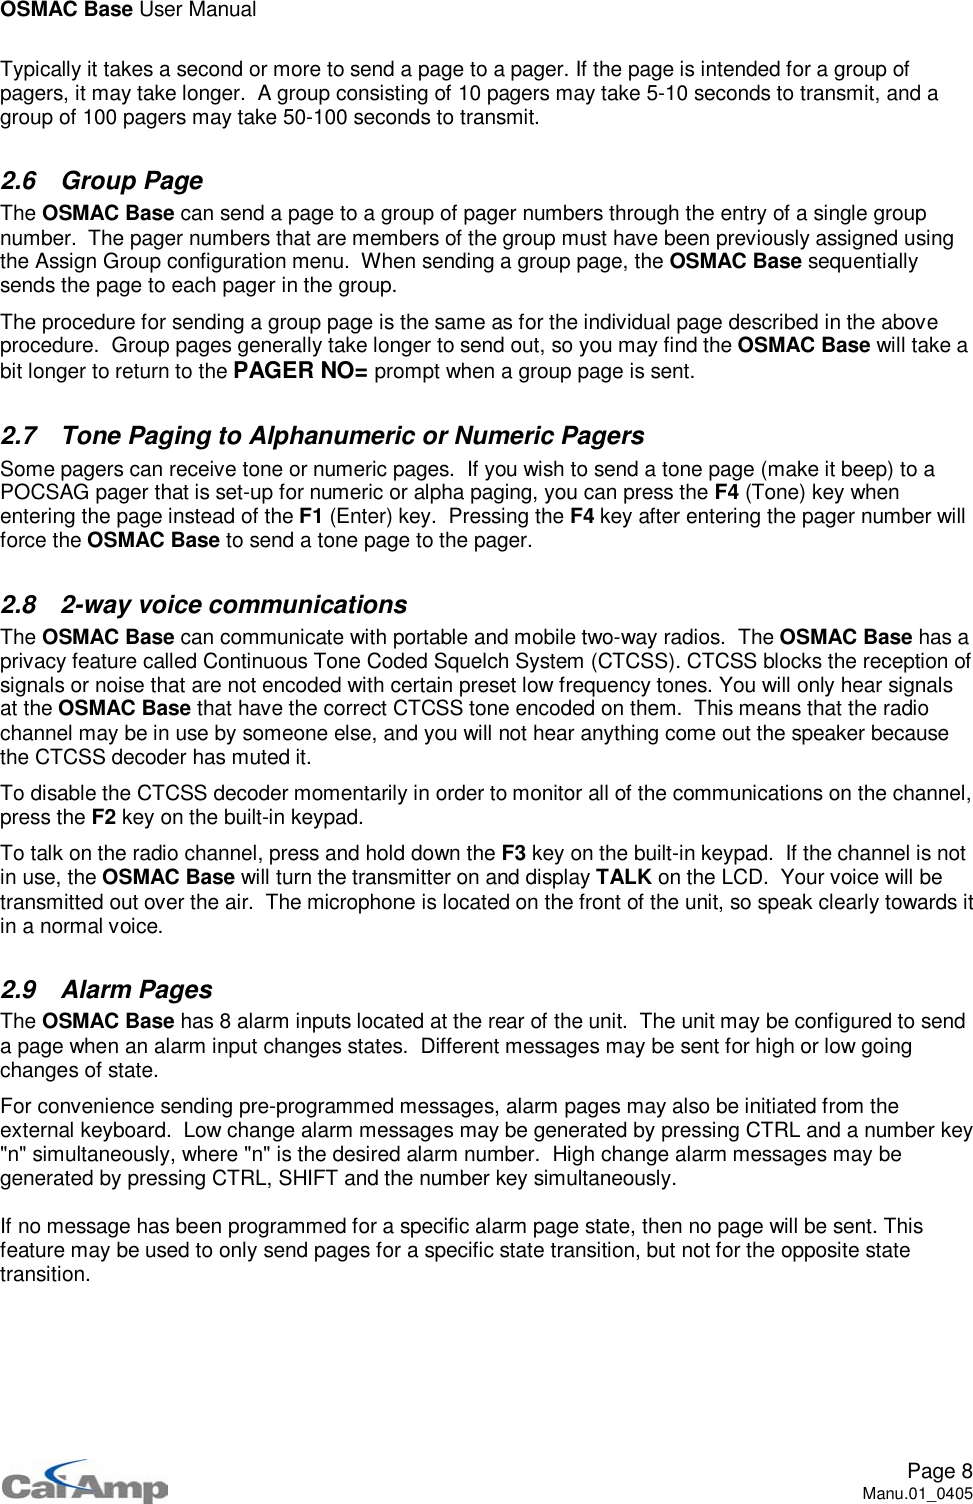 OSMAC Base User ManualPage 8Manu.01_0405Typically it takes a second or more to send a page to a pager. If the page is intended for a group ofpagers, it may take longer. A group consisting of 10 pagers may take 5-10 seconds to transmit, and agroup of 100 pagers may take 50-100 seconds to transmit.2.6 Group PageThe OSMAC Base can send a page to a group of pager numbers through the entry of a single groupnumber. The pager numbers that are members of the group must have been previously assigned usingthe Assign Group configuration menu. When sending a group page, the OSMAC Base sequentiallysends the page to each pager in the group.The procedure for sending a group page is the same as for the individual page described in the aboveprocedure. Group pages generally take longer to send out, so you may find the OSMAC Base will take abit longer to return to the PAGER NO= prompt when a group page is sent.2.7 Tone Paging to Alphanumeric or Numeric PagersSome pagers can receive tone or numeric pages. If you wish to send a tone page (make it beep) to aPOCSAG pager that is set-up for numeric or alpha paging, you can press the F4 (Tone) key whenentering the page instead of the F1 (Enter) key. Pressing the F4 key after entering the pager number willforce the OSMAC Base to send a tone page to the pager.2.8 2-way voice communicationsThe OSMAC Base can communicate with portable and mobile two-way radios. The OSMAC Base has aprivacy feature called Continuous Tone Coded Squelch System (CTCSS). CTCSS blocks the reception ofsignals or noise that are not encoded with certain preset low frequency tones. You will only hear signalsat the OSMAC Base that have the correct CTCSS tone encoded on them. This means that the radiochannel may be in use by someone else, and you will not hear anything come out the speaker becausethe CTCSS decoder has muted it.To disable the CTCSS decoder momentarily in order to monitor all of the communications on the channel,press the F2 key on the built-in keypad.To talk on the radio channel, press and hold down the F3 key on the built-in keypad. If the channel is notin use, the OSMAC Base will turn the transmitter on and display TALK on the LCD. Your voice will betransmitted out over the air. The microphone is located on the front of the unit, so speak clearly towards itin a normal voice.2.9 Alarm PagesThe OSMAC Base has 8 alarm inputs located at the rear of the unit. The unit may be configured to senda page when an alarm input changes states. Different messages may be sent for high or low goingchanges of state.For convenience sending pre-programmed messages, alarm pages may also be initiated from theexternal keyboard. Low change alarm messages may be generated by pressing CTRL and a number key&quot;n&quot; simultaneously, where &quot;n&quot; is the desired alarm number. High change alarm messages may begenerated by pressing CTRL, SHIFT and the number key simultaneously.If no message has been programmed for a specific alarm page state, then no page will be sent. Thisfeature may be used to only send pages for a specific state transition, but not for the opposite statetransition.